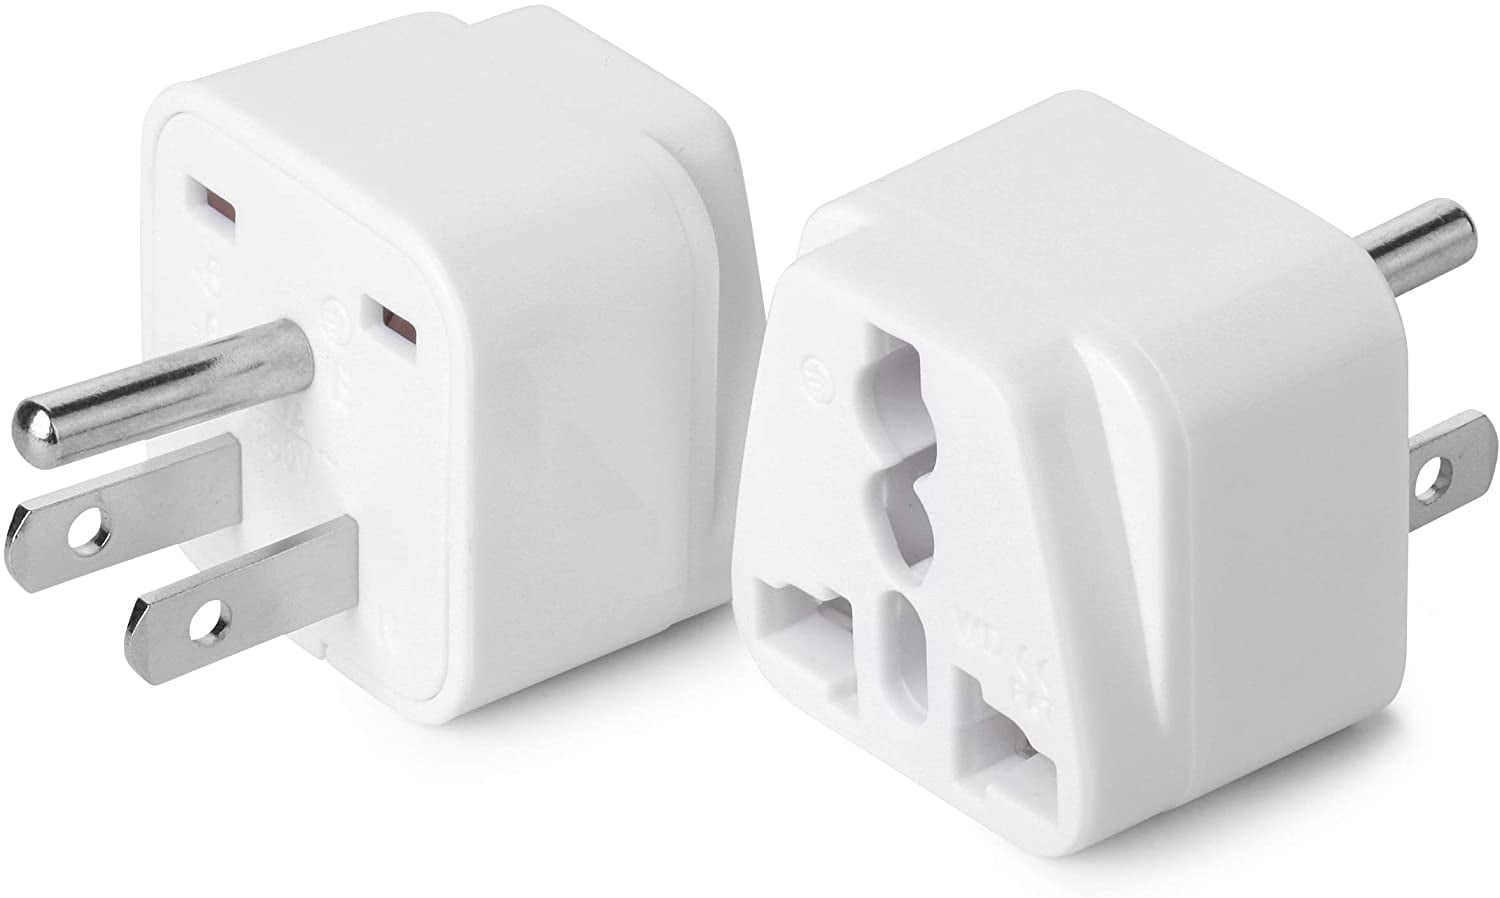 Bates- Universal to American Outlet Plug Adapter, 2 Pack, Canada Universal  Travel Plug Adapter, 2 Pc, UK to US Adapter, US Plug Adapter 